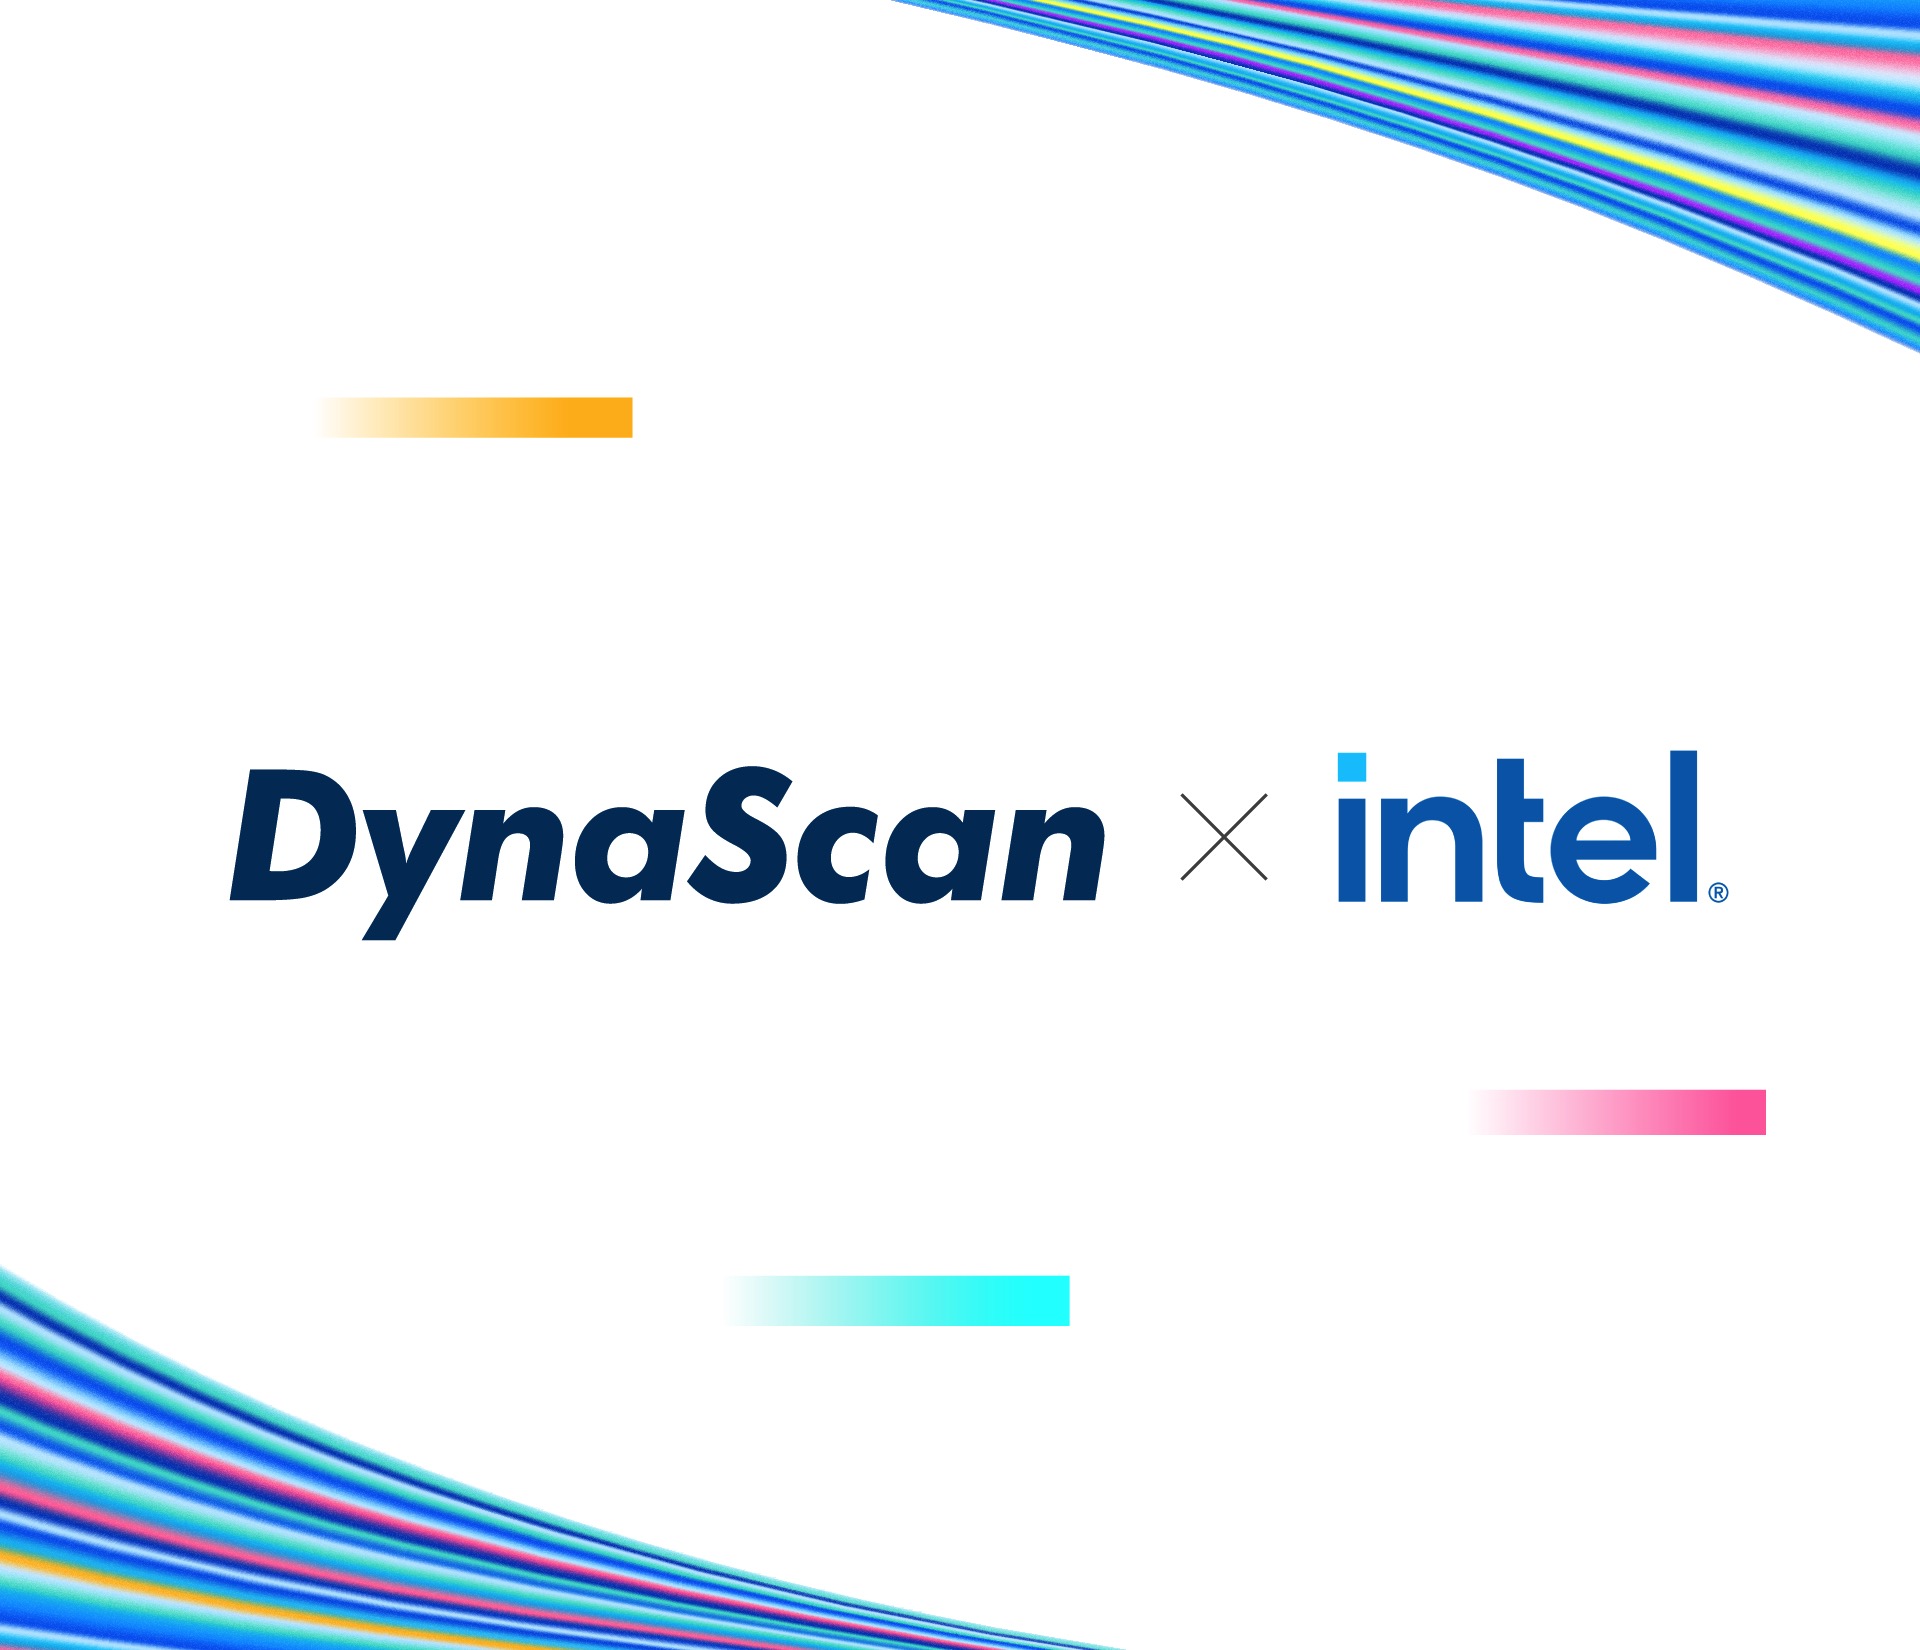 DynaScan Enhances Display Solutions with Intel® Smart Display Module Integration Options